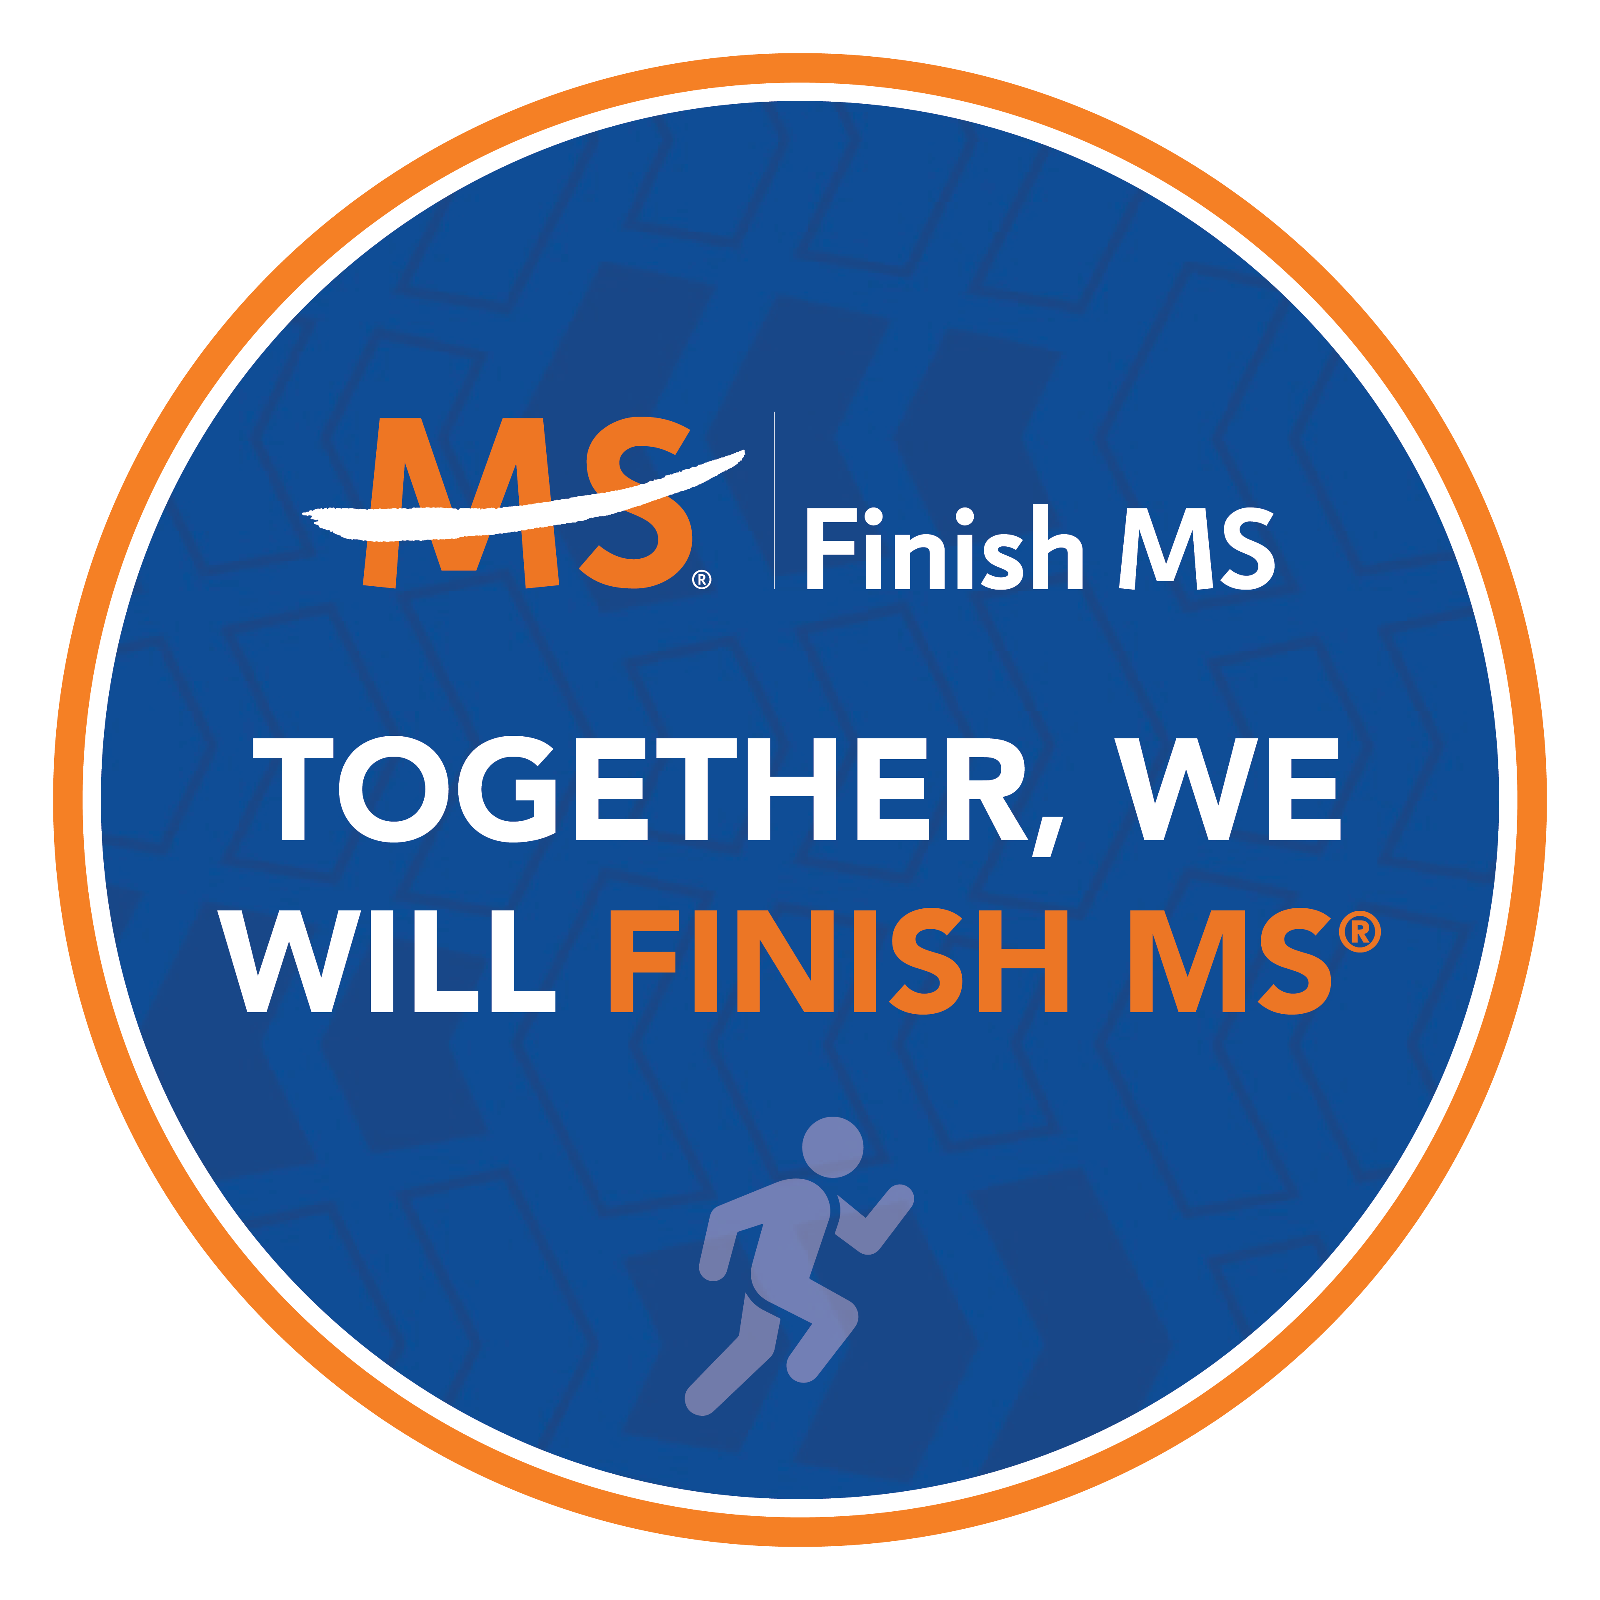 Finish MS - Together, We Will Finish MS